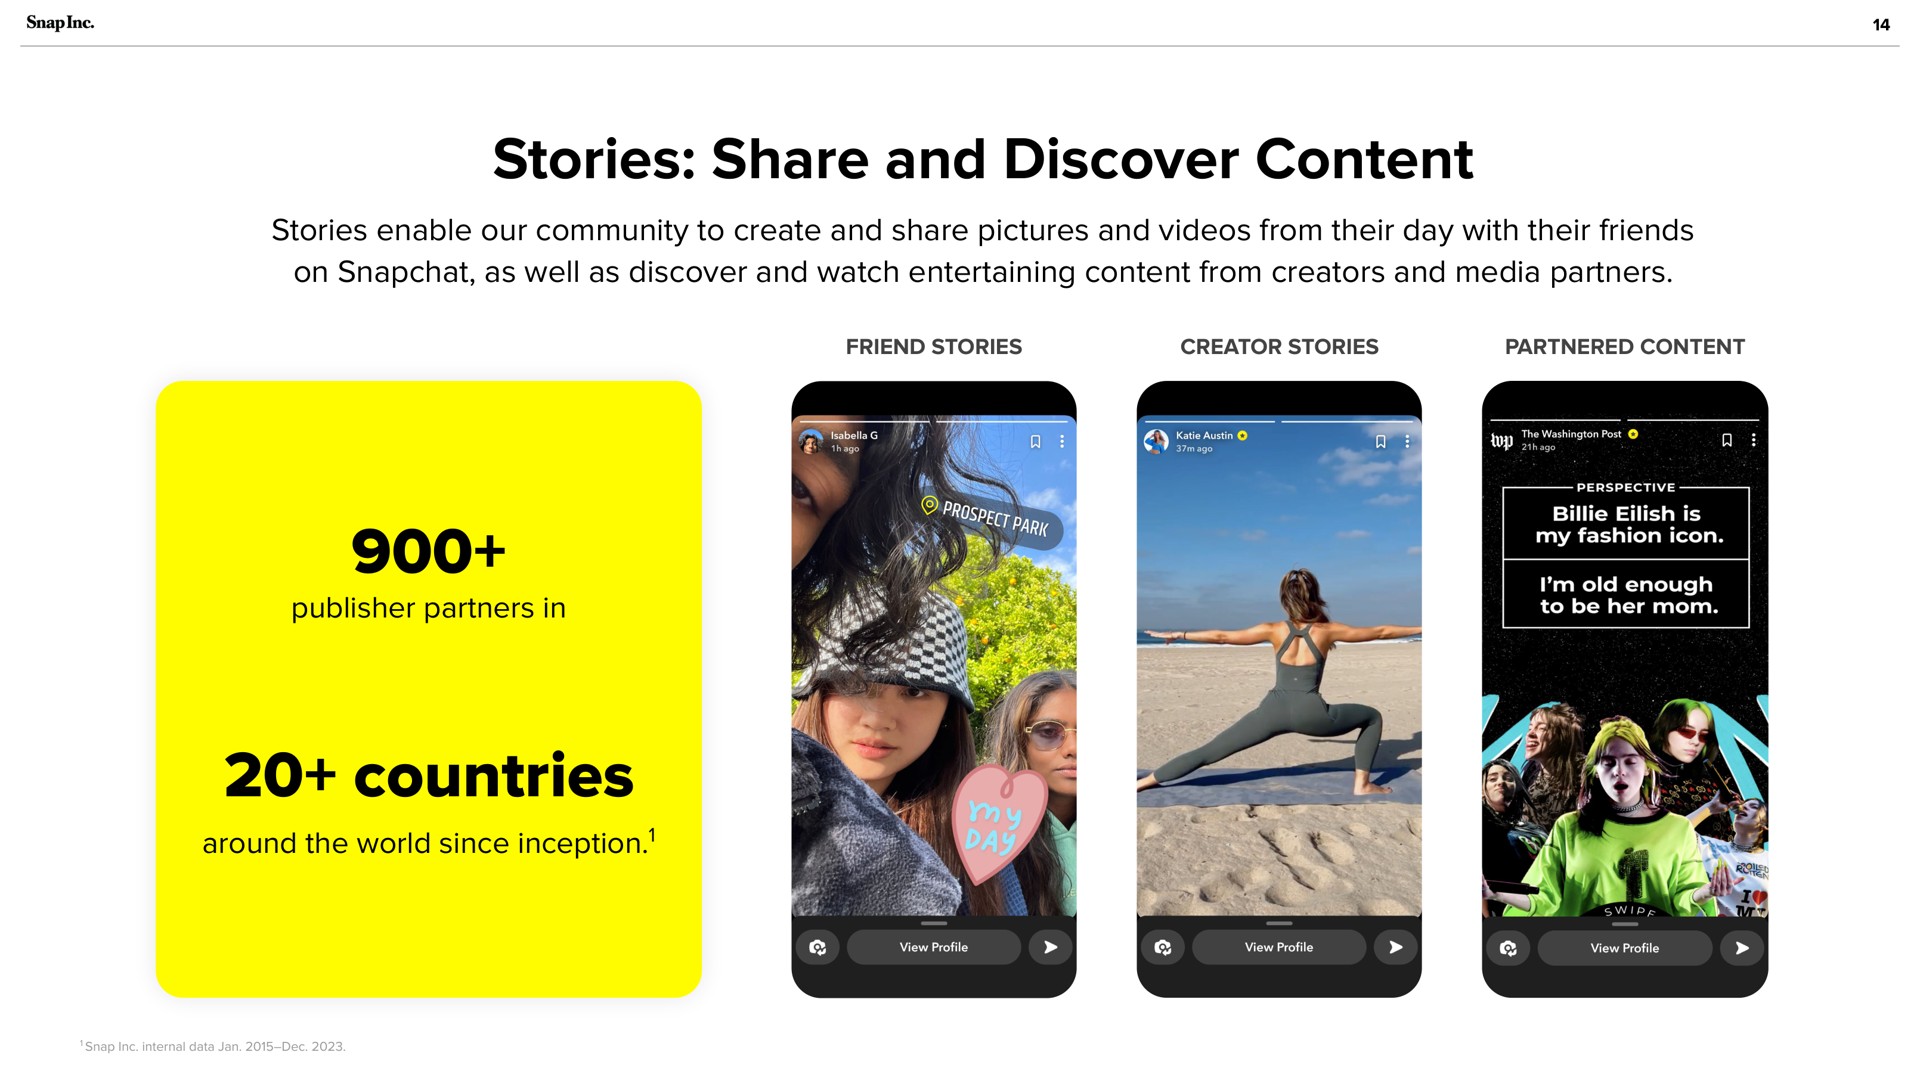 stories share and discover content countries yom my fashion icon | Snap Inc